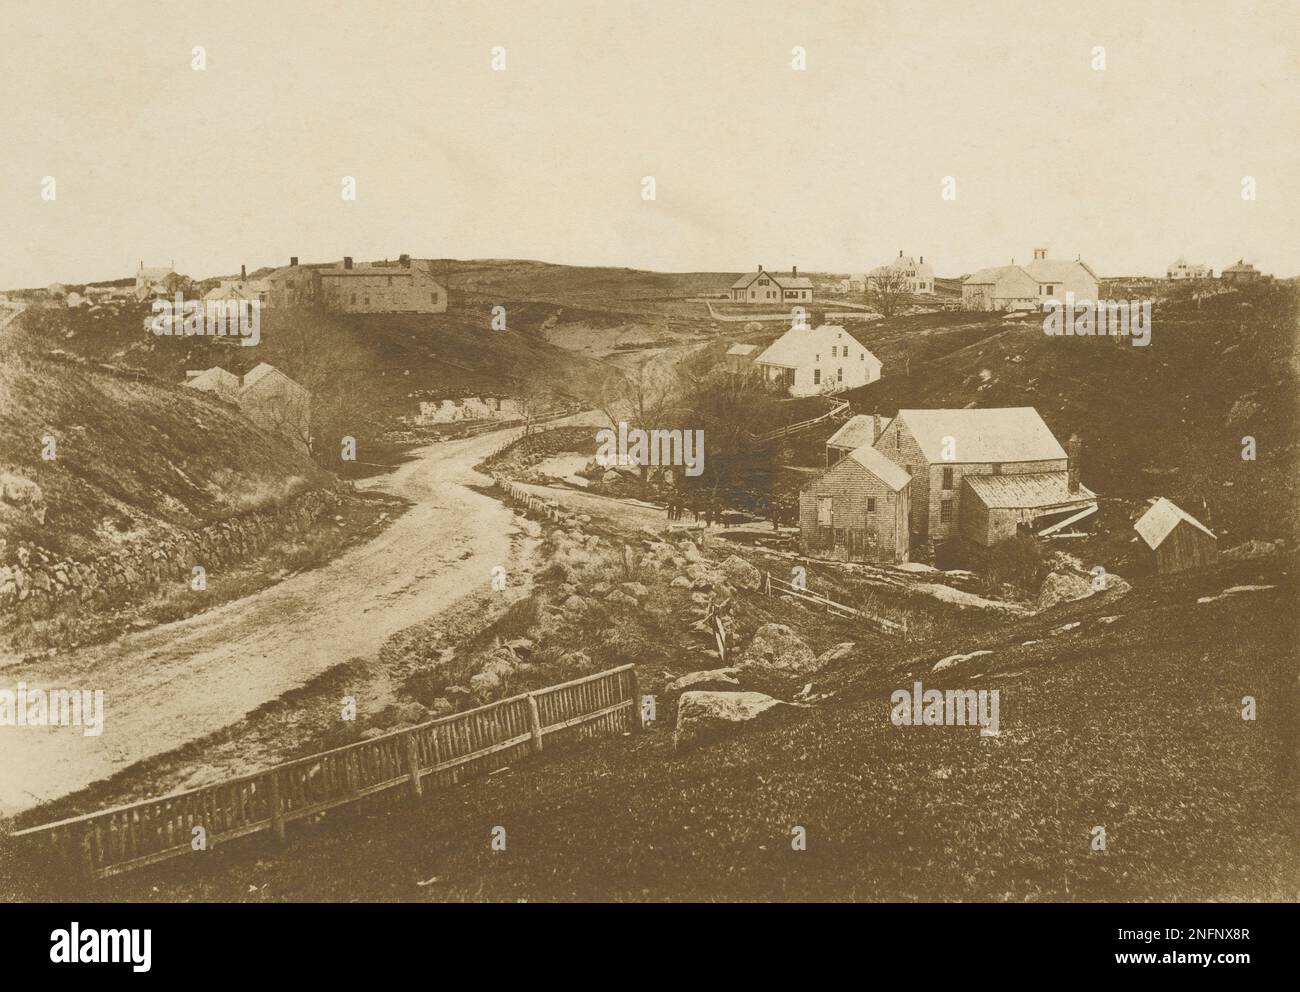 Antique c1880 photograph, showing the Stony Brook Mill site. To the right of the road are the woolen mill and tannery. To the center left of the road, peaking above the low hill, is the Perry home, destroyed by fire in 1898. Location: Brewster, Cape Cod, Massachusetts. SOURCE: ORIGINAL PHOTOGRAPH Stock Photo